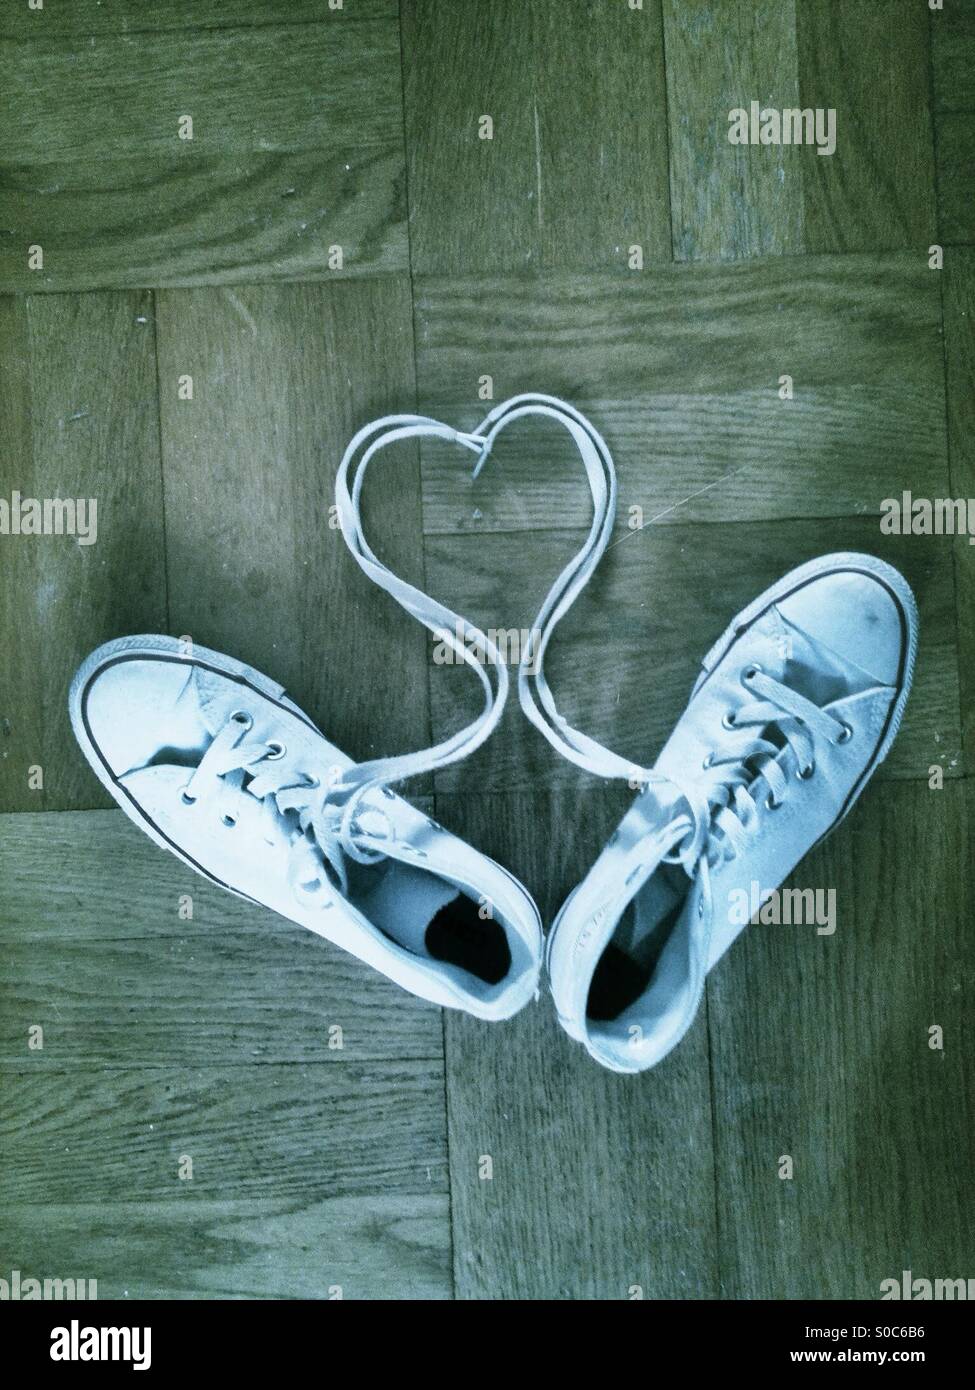 Heart shape in laces with white trainers on a wooden floor. Stock Photo